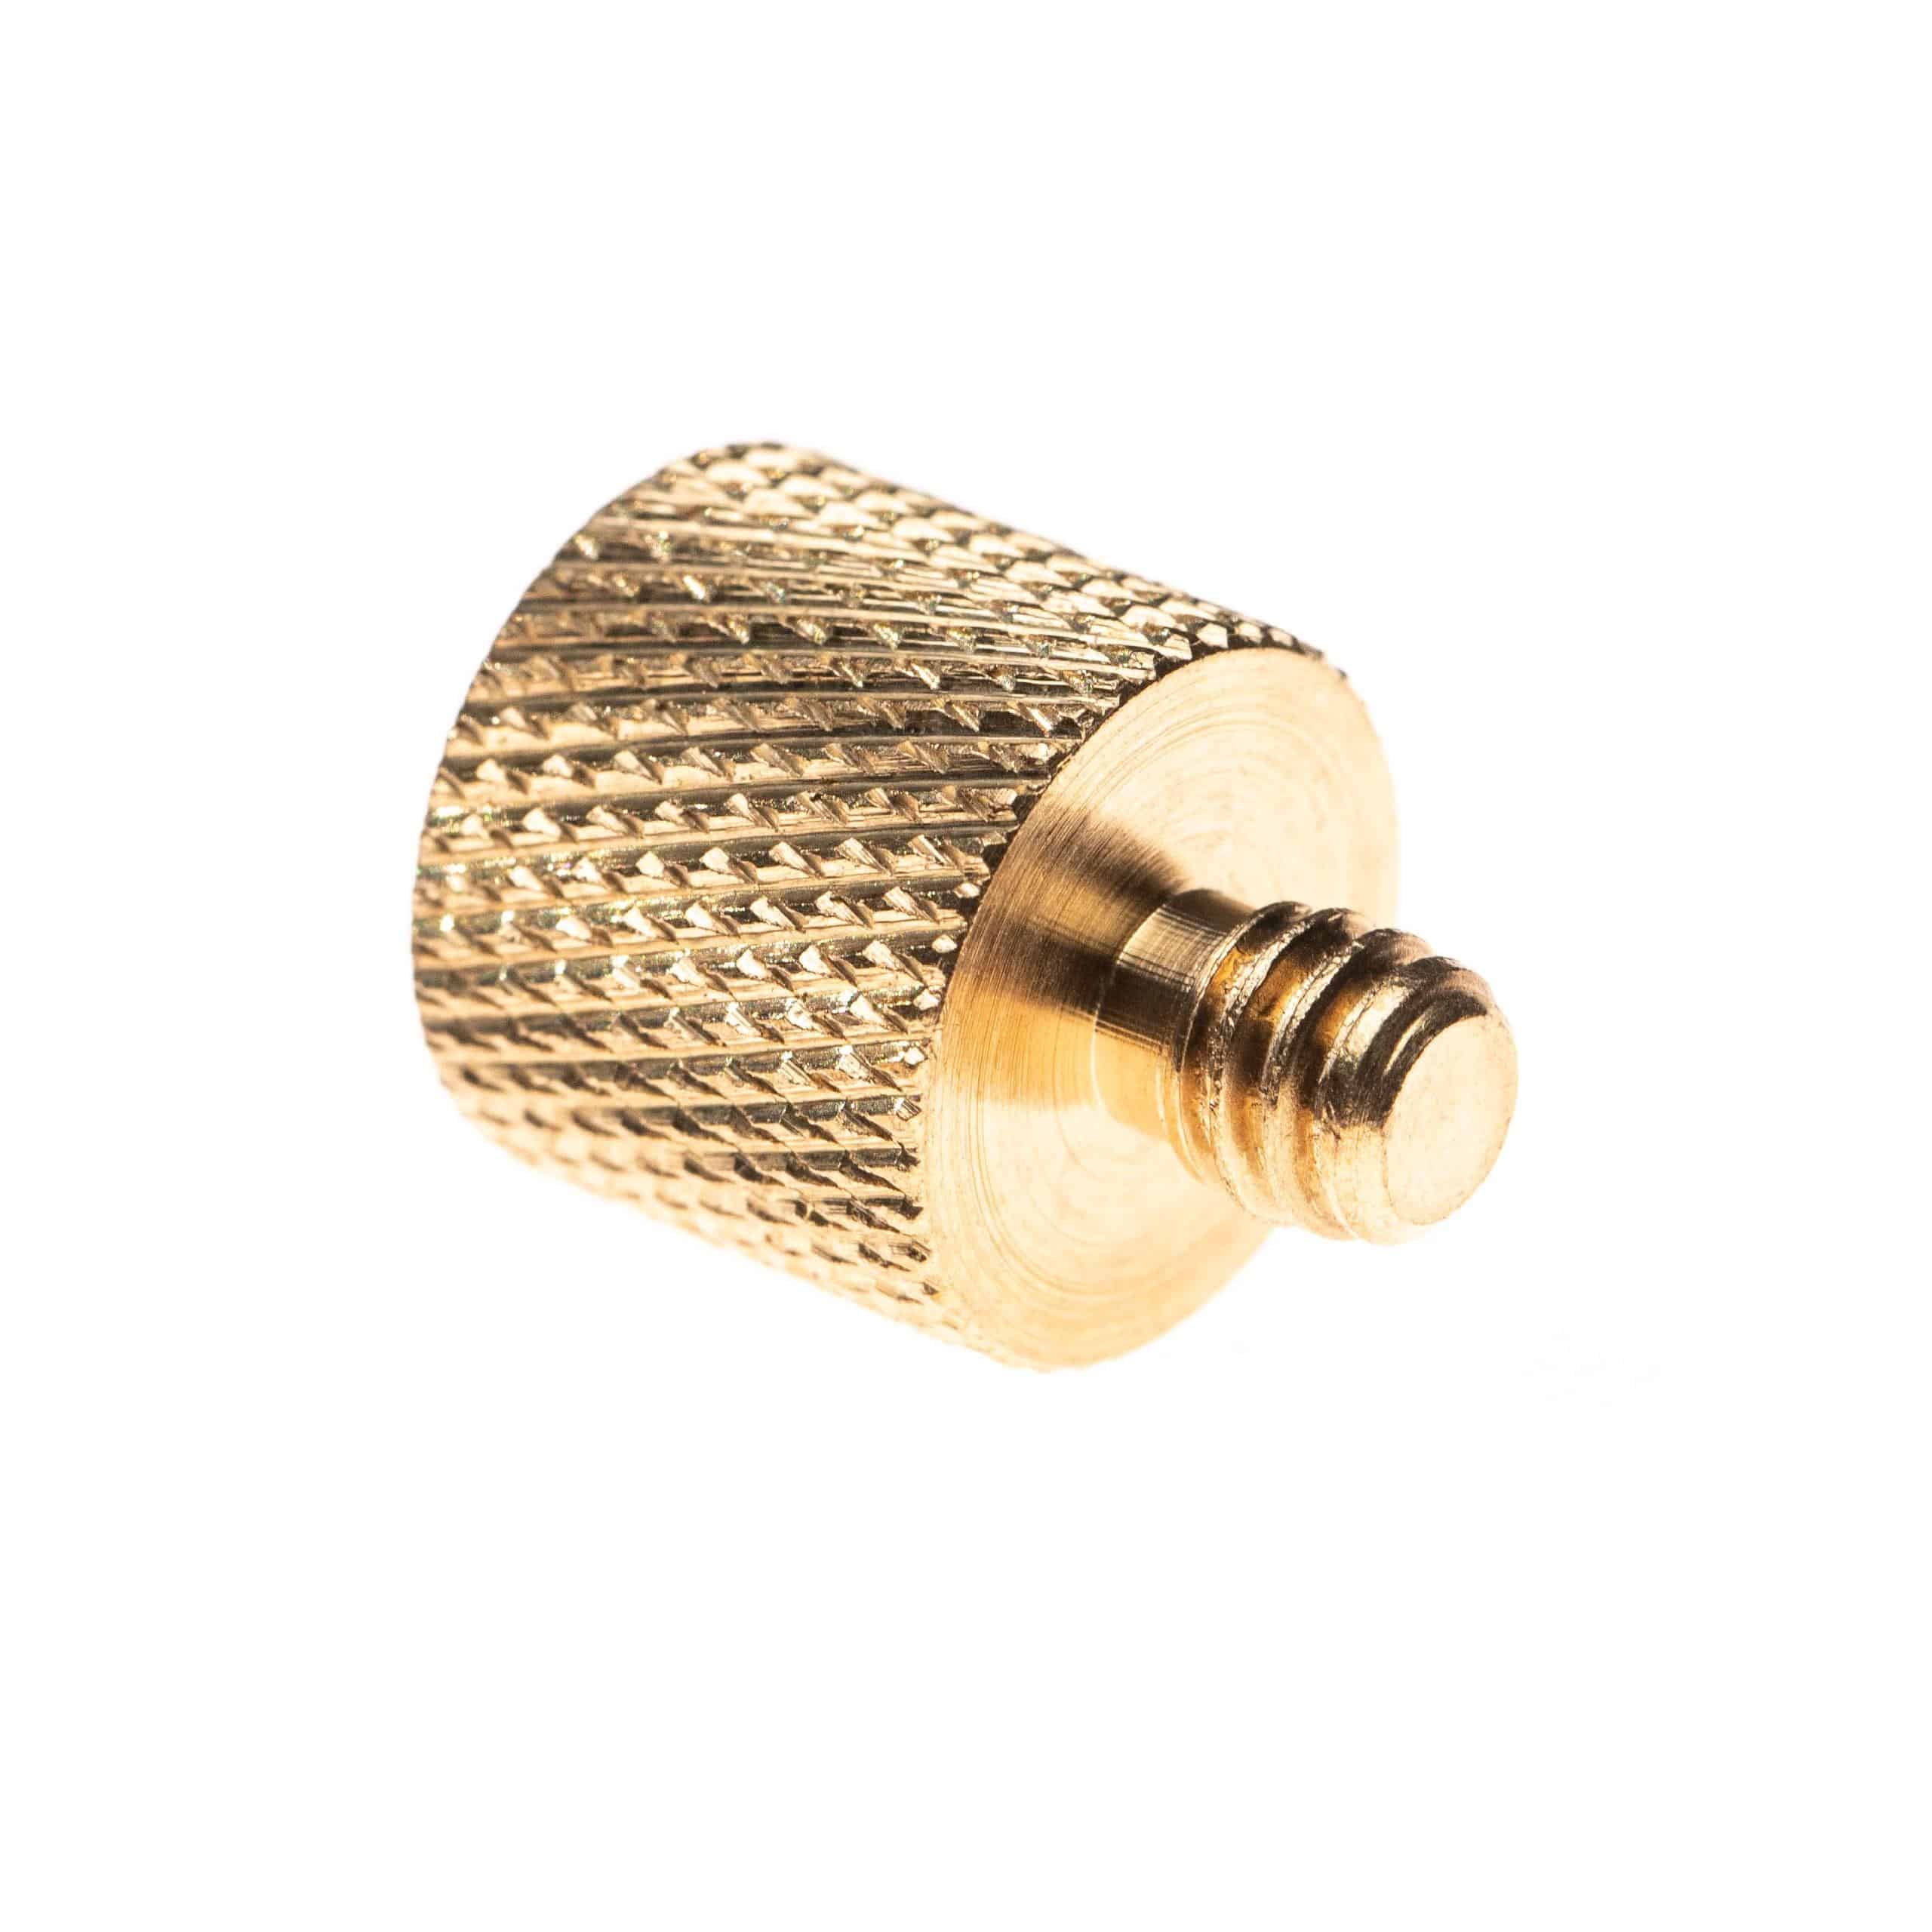 Mic Stand Screw Adapter 3/8" screw thread to 1/4" screw thread - Converter, Connector Gold